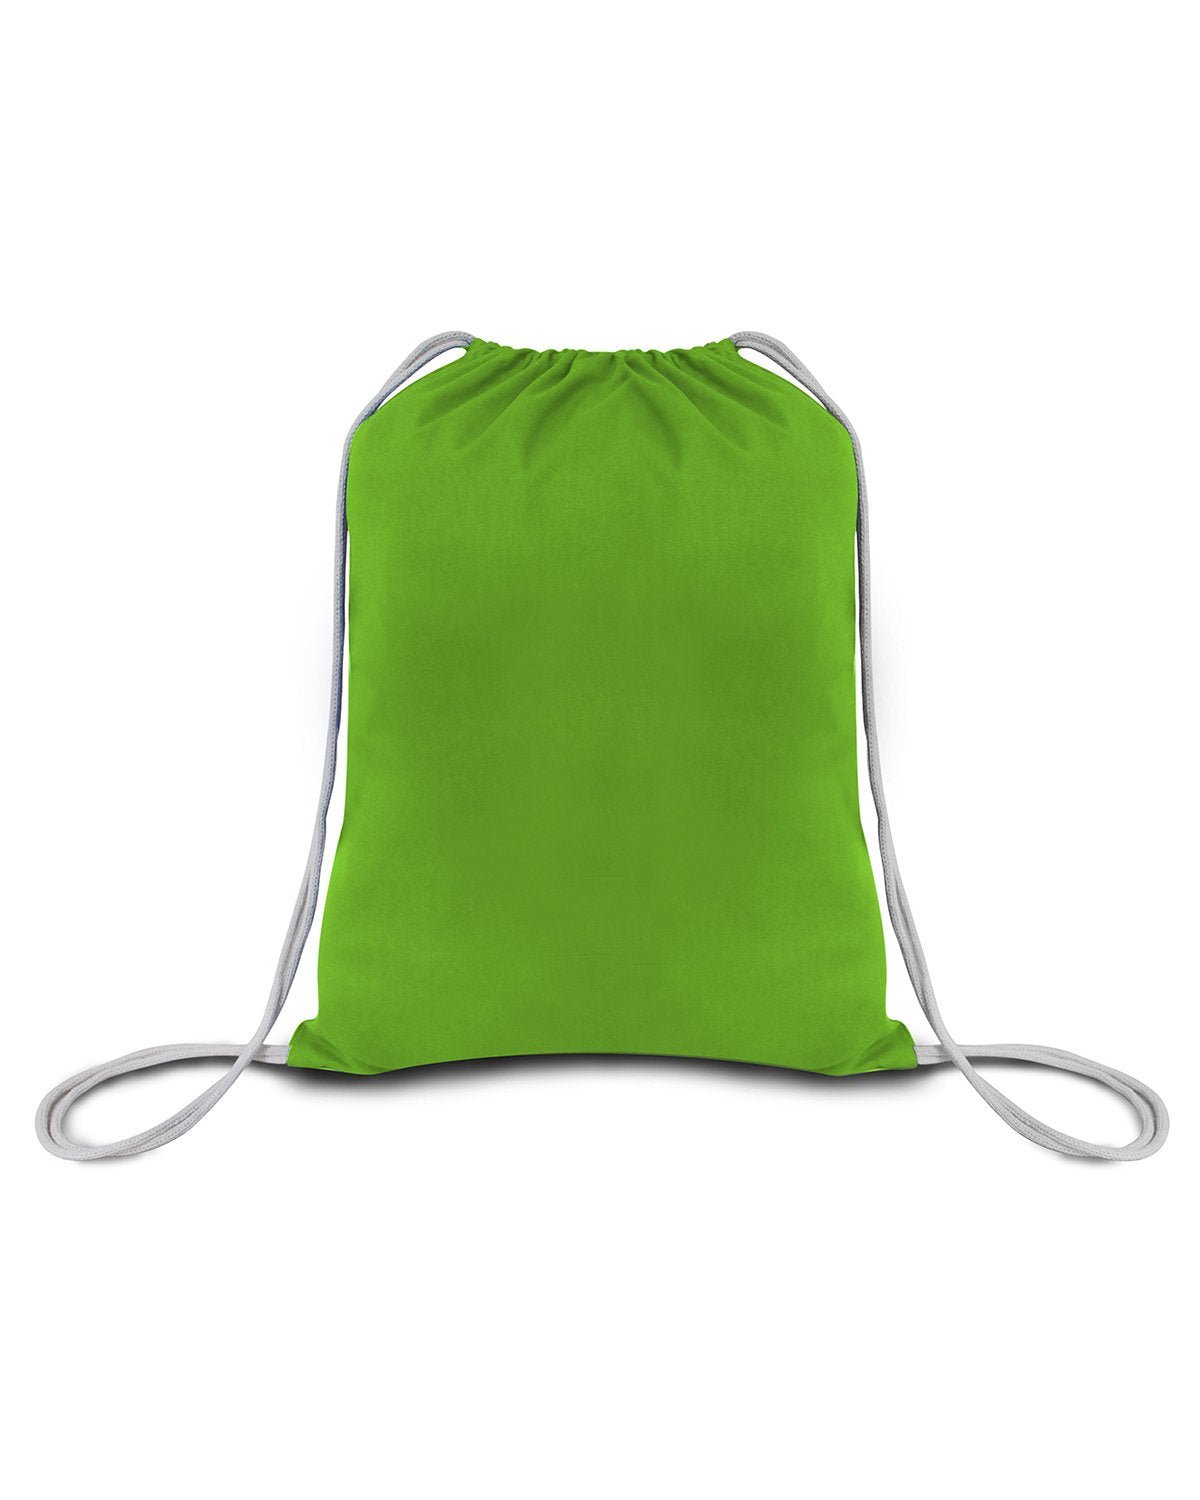 OAD101-OAD-LIME GREEN-OAD-Bags and Accessories-1